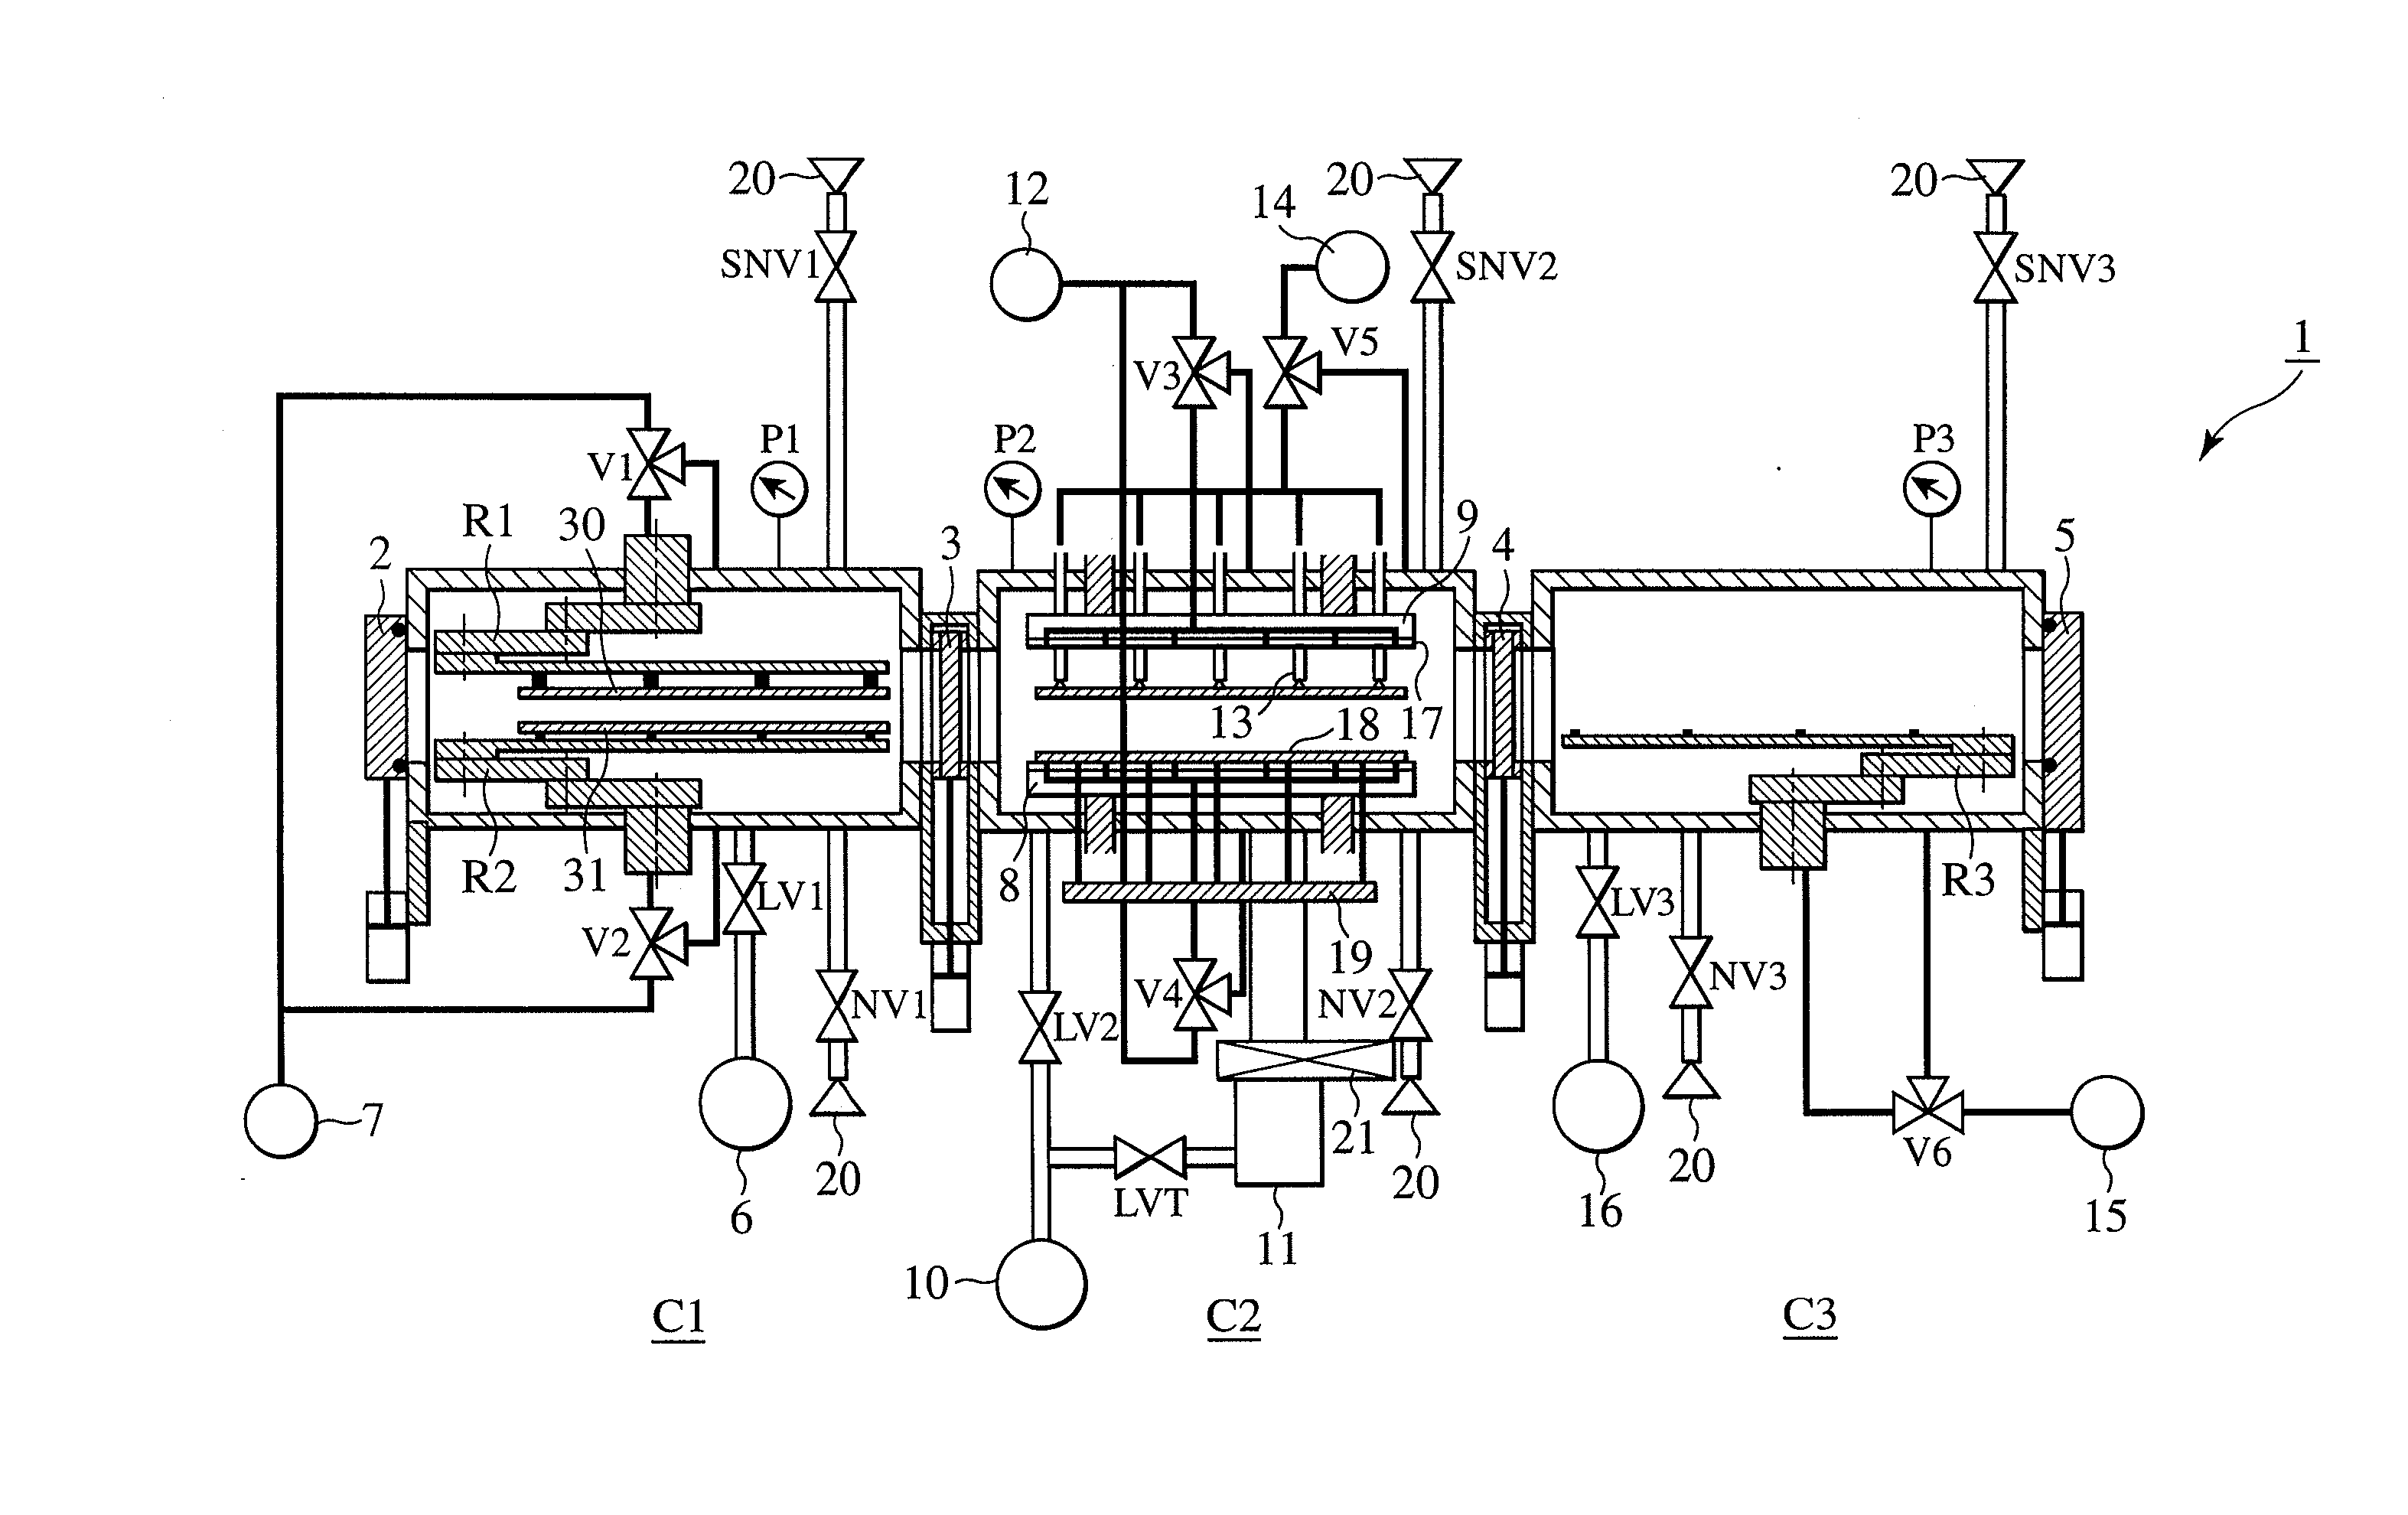 Substrate assembly apparatus and method